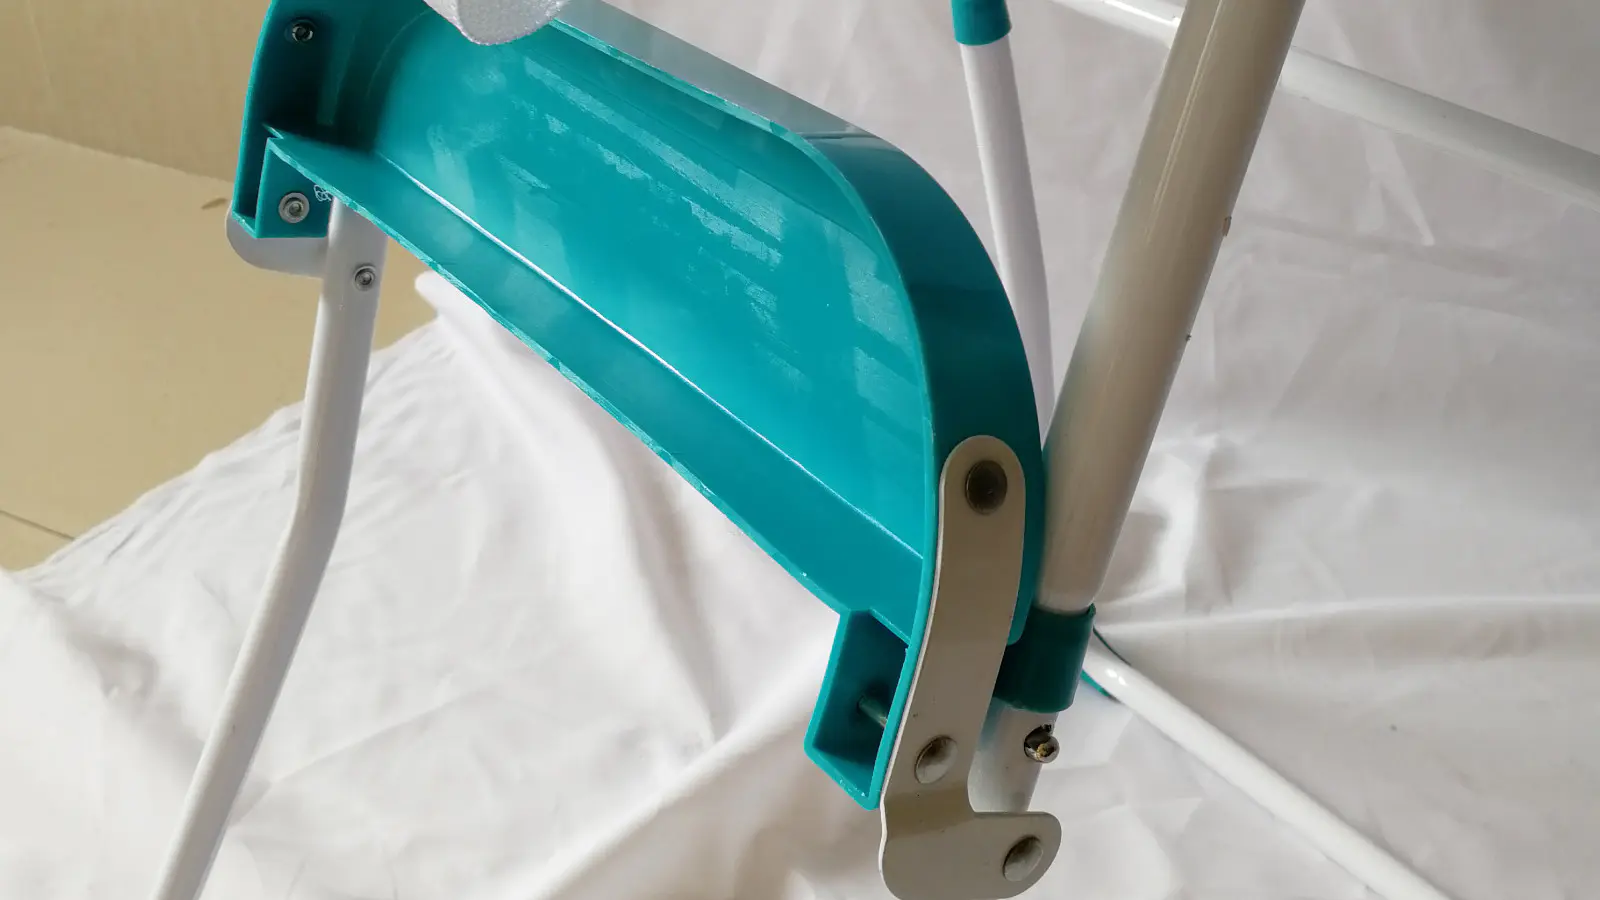 Aoqi child high chair directly sale for infant